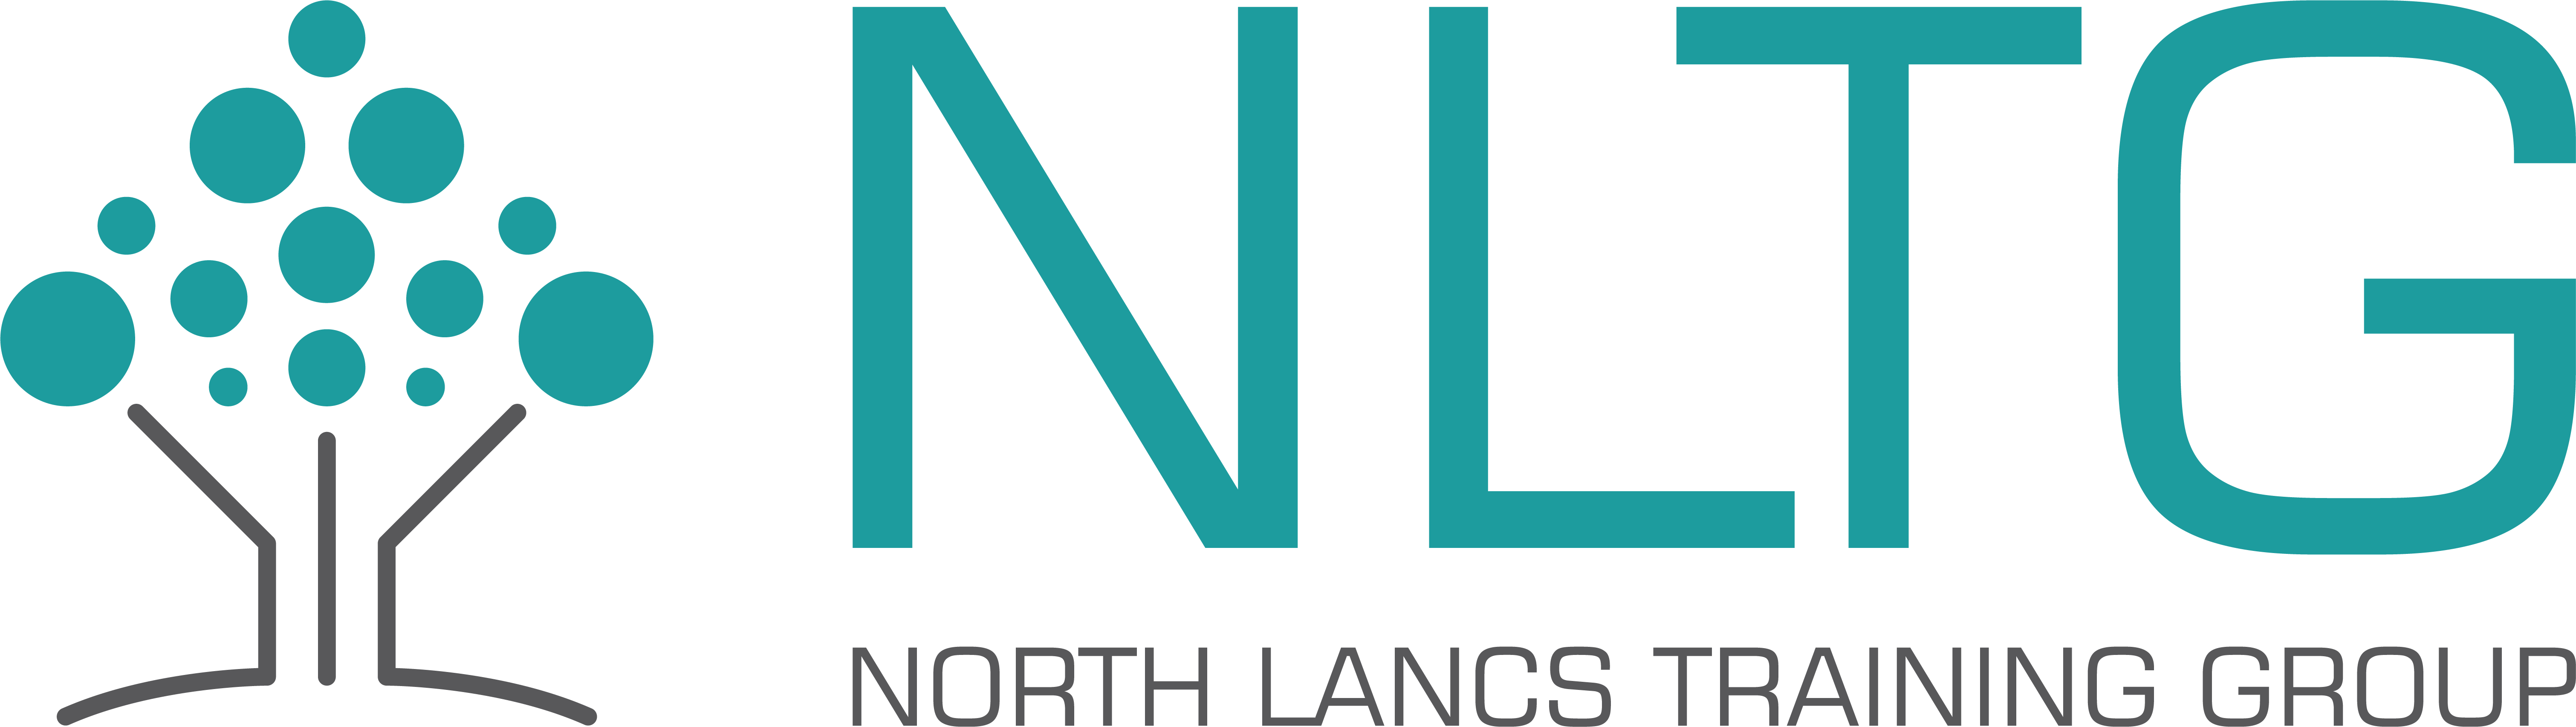 Colleges & Training Providers: North Lancs Training Group Ltd